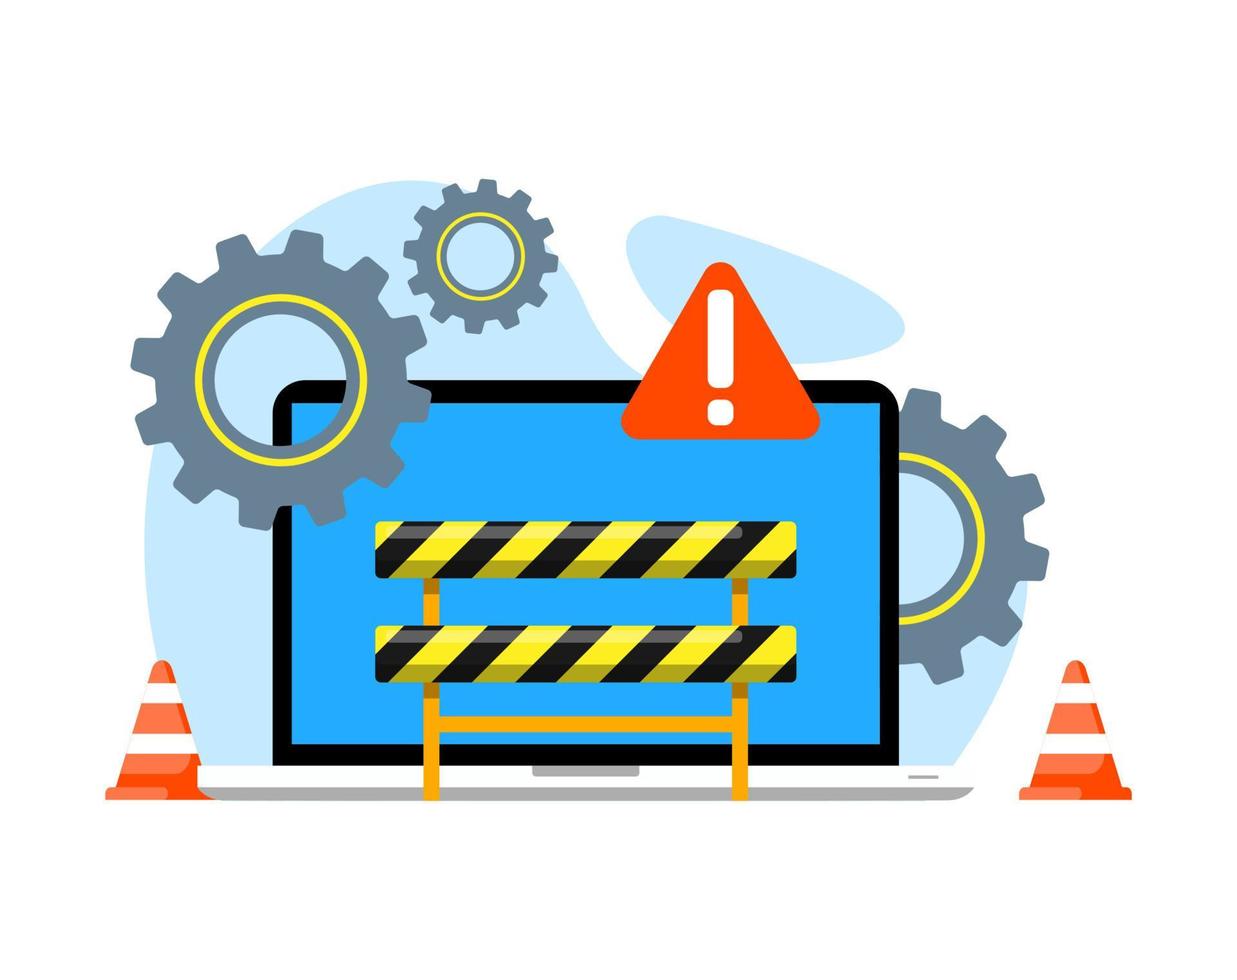 404 error page, under update, system maintenance concept illustration flat design vector eps10. graphic element for lading page, empty state ui, infographic